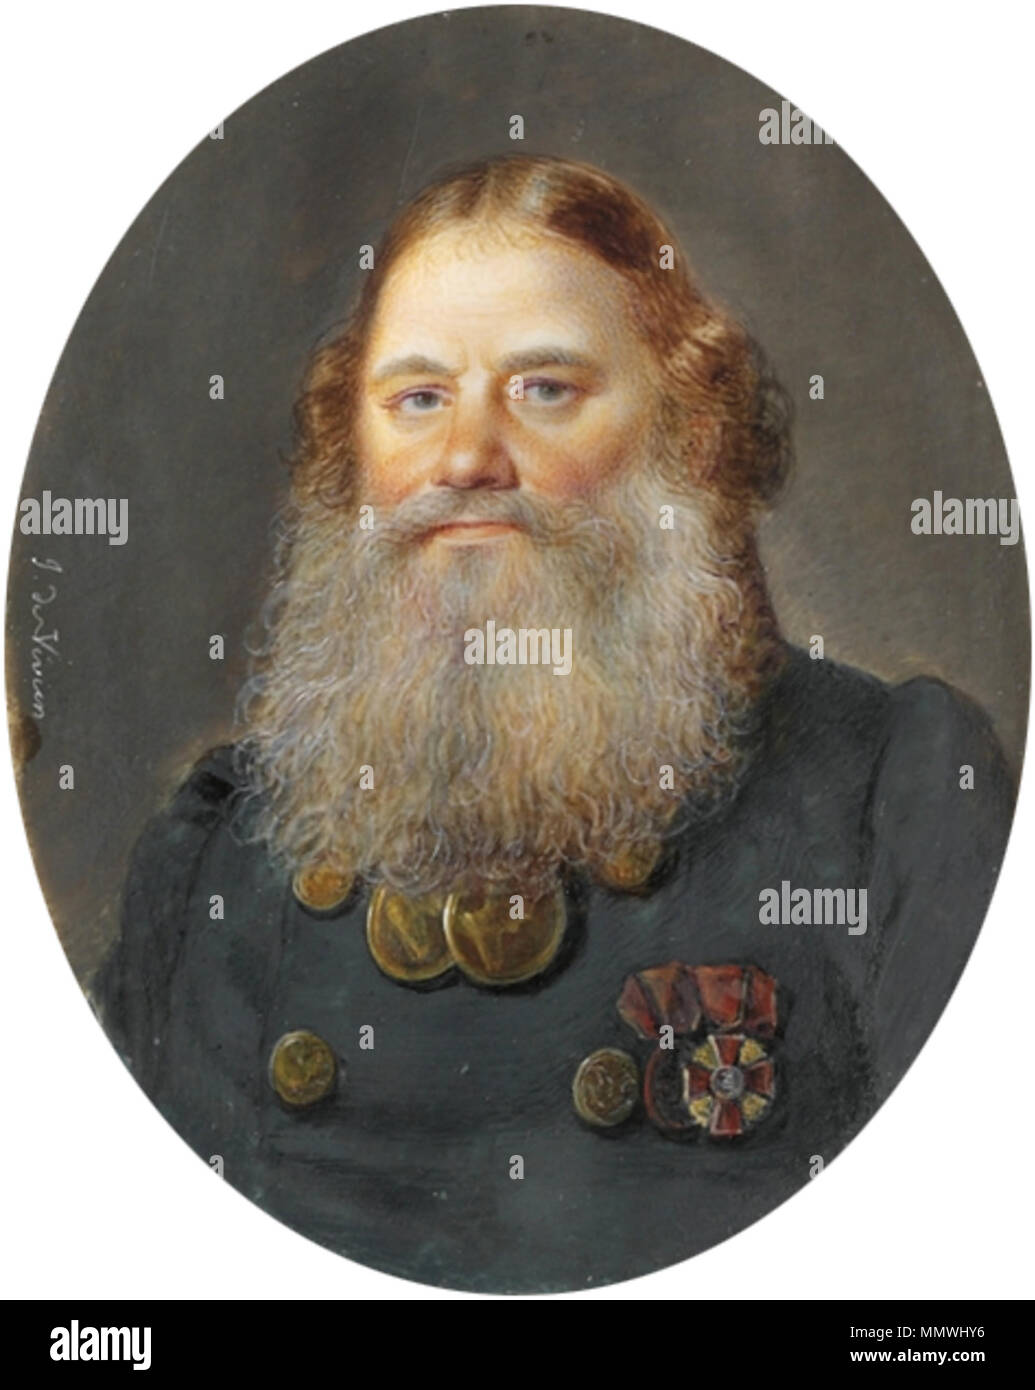 . English: JOSIF JOSIFOVICH DE VIVIEN DE CHÂTEAUBRUN (RUSSIAN, 1793-1852) Ilya Ivanovich Baikov (1768-1838), in double-breasted loden green coat with gilt buttons, wearing the badges of the Imperial Russian Order of St. Anne (3rd class), the bronze medal for the Campaign of 1812 with the ribbon of St. Anne and, around his neck, two presentation medals for Zeal from Tsar Alexander I, long red hair and grey beard signed 'J. de Vivien' (mid left) on ivory oval, 3 1/8 in. (80 mm.) high, rectangular ormolu frame with shell spandrels Coachman Ilya Baikov by Joseph Vivien (19 c., priv.coll.) Stock Photo